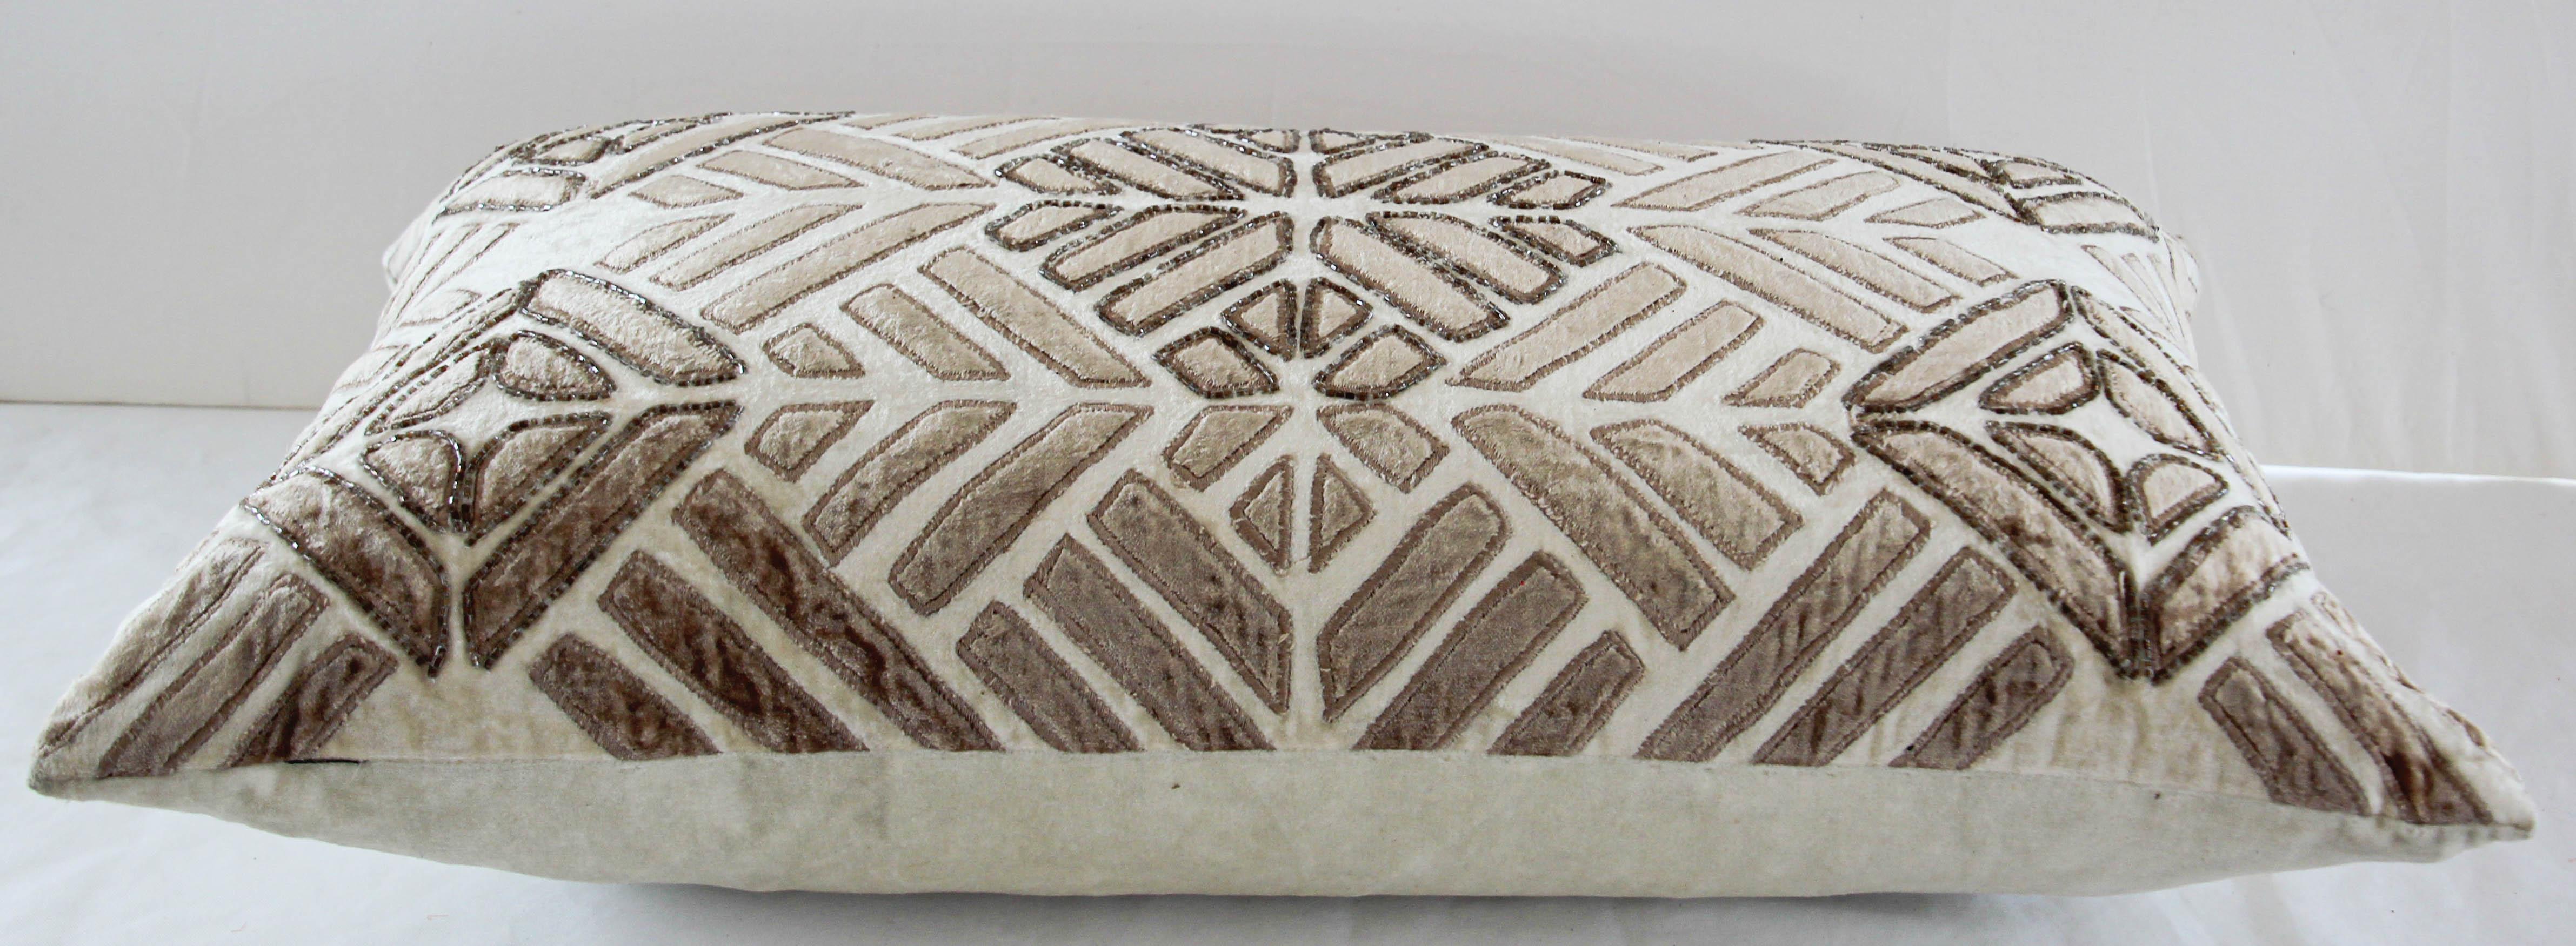 Vintage Beige and ivory cut velvet pillow with metallic beads.
Nice decorative lumbar pillow.
This pillow features a central medallion with silver beads decoration, broken chevron cut velvet around it.
Knife edge finish.
Taupe-on-ivory-colored